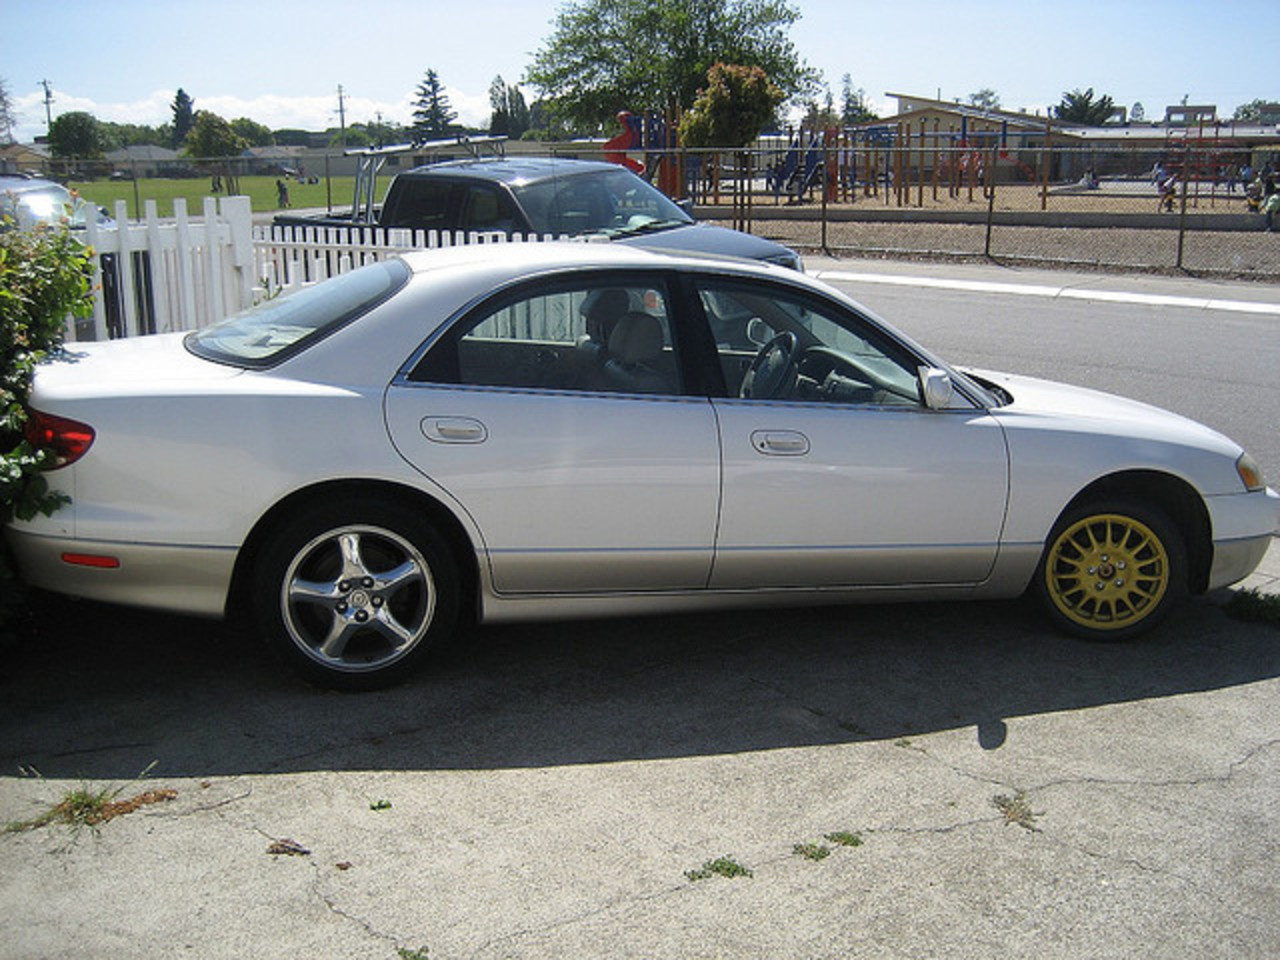 2002 Mazda Millenia S $2000 obo ............side view with front ...